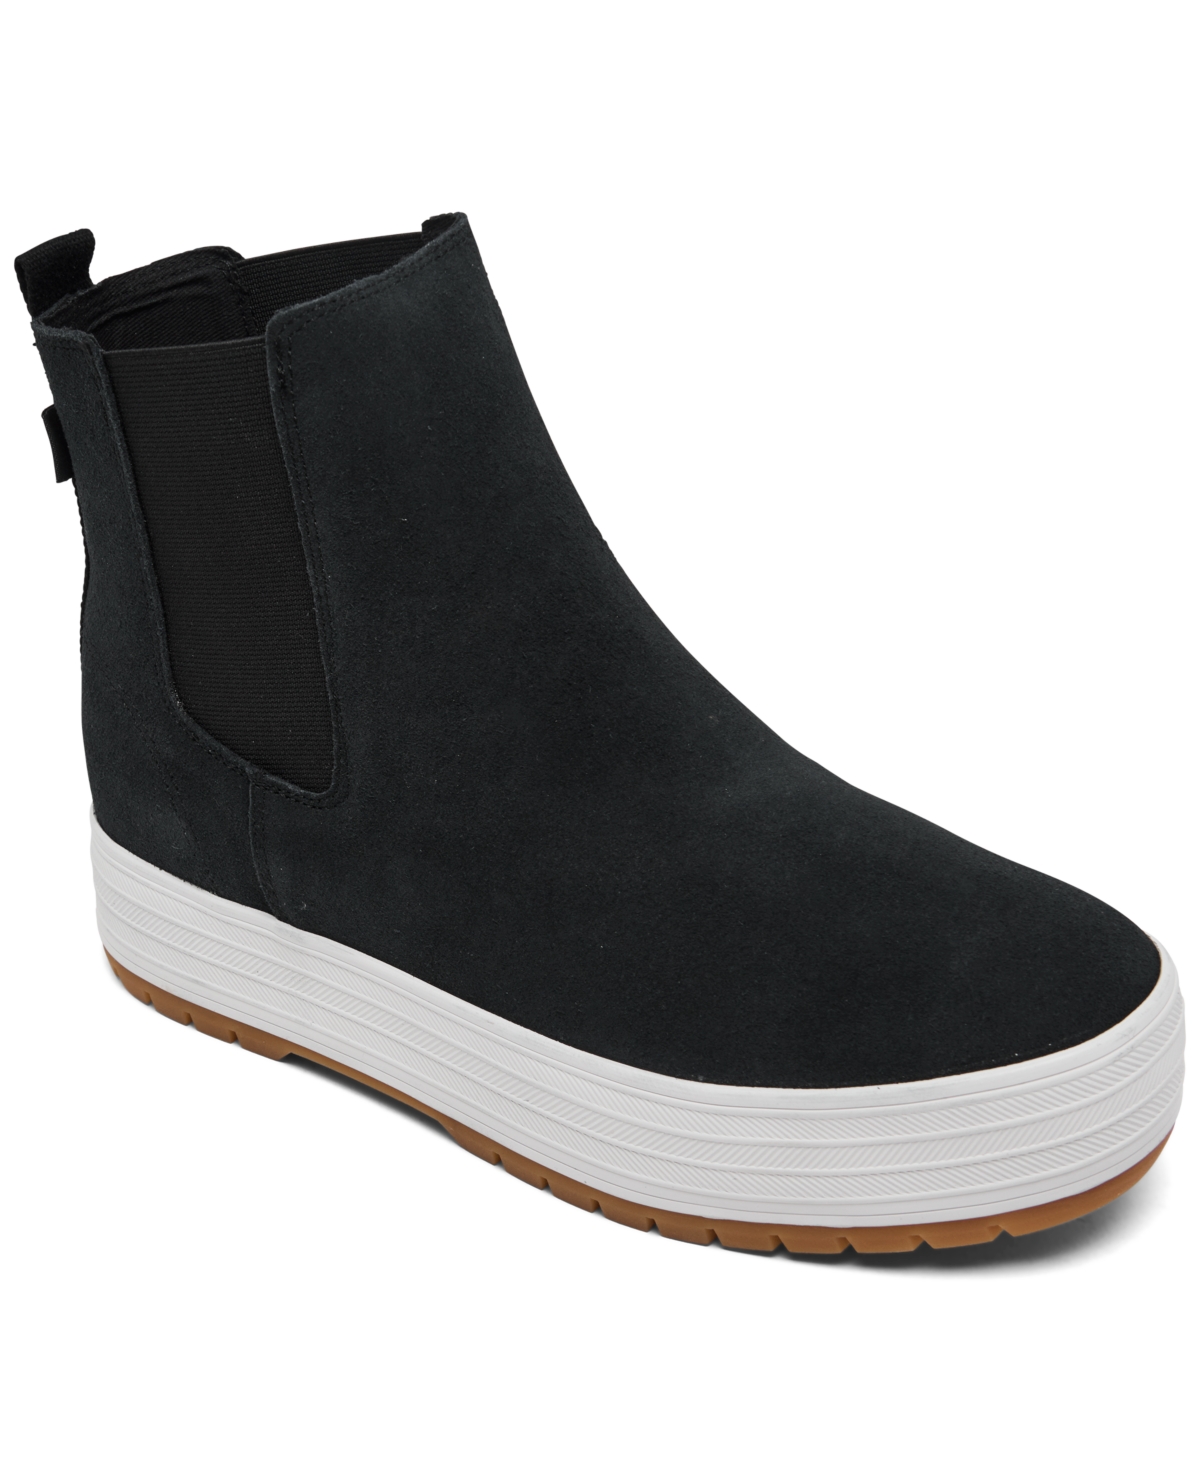 Shop Keds Women's Chelsea Lug Boots From Finish Line In Black